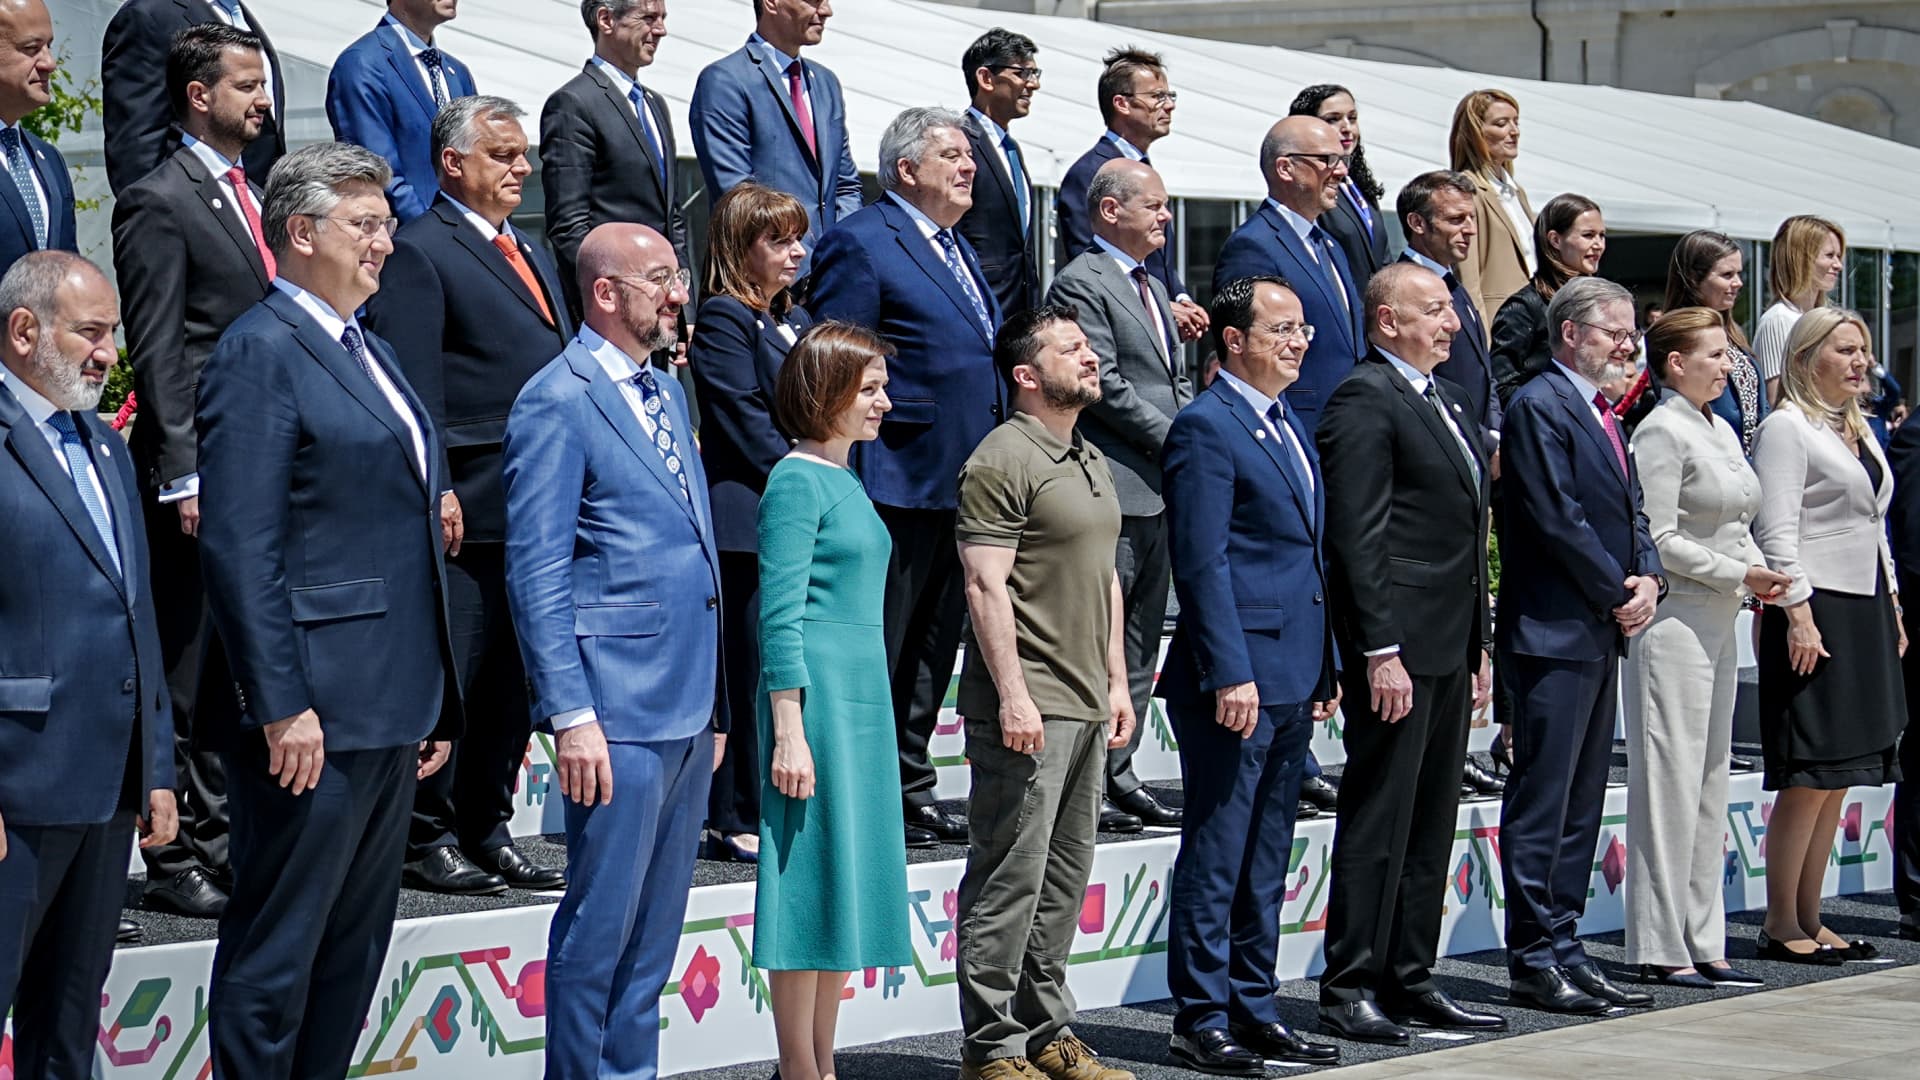 The heads of state and government with Volodymyr Selenskyj (front M), President of Ukraine, and German Chancellor Olaf Scholz (SPD, second row, center r), stand together for the family photo at the European Political Community (EPC) summit in Moldova.